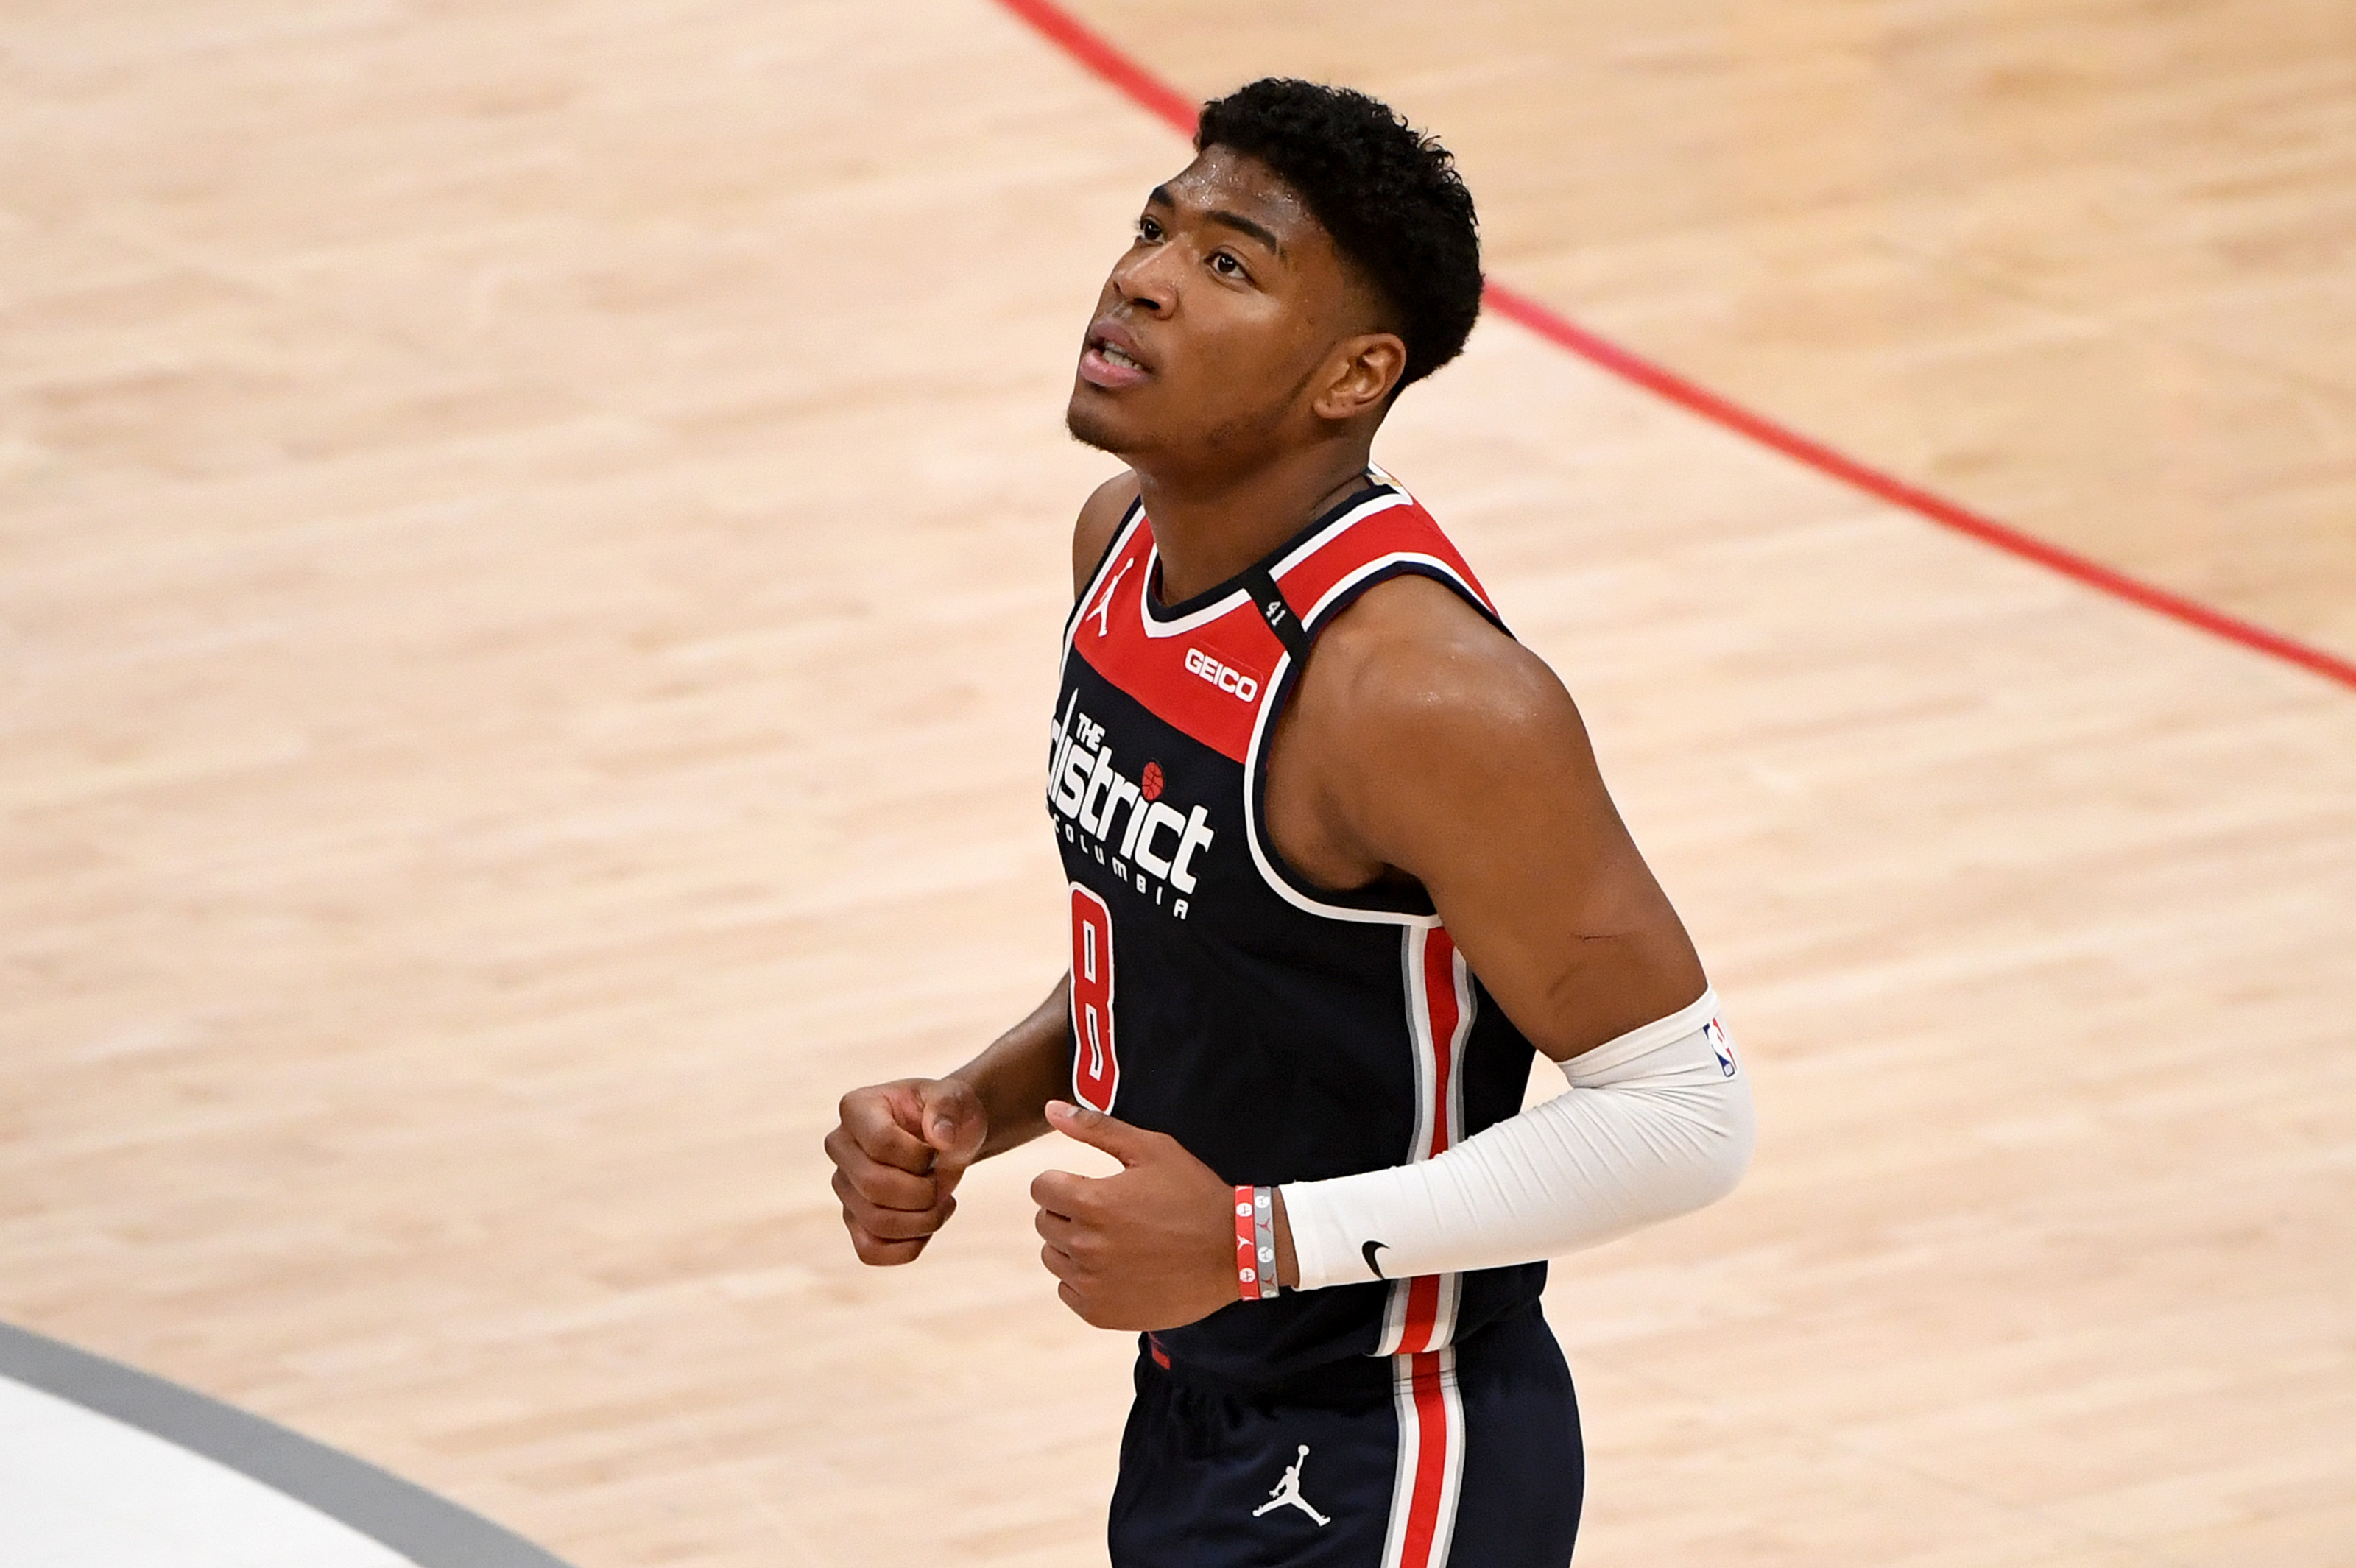 What they're saying about the Wizards selecting Rui Hachimura